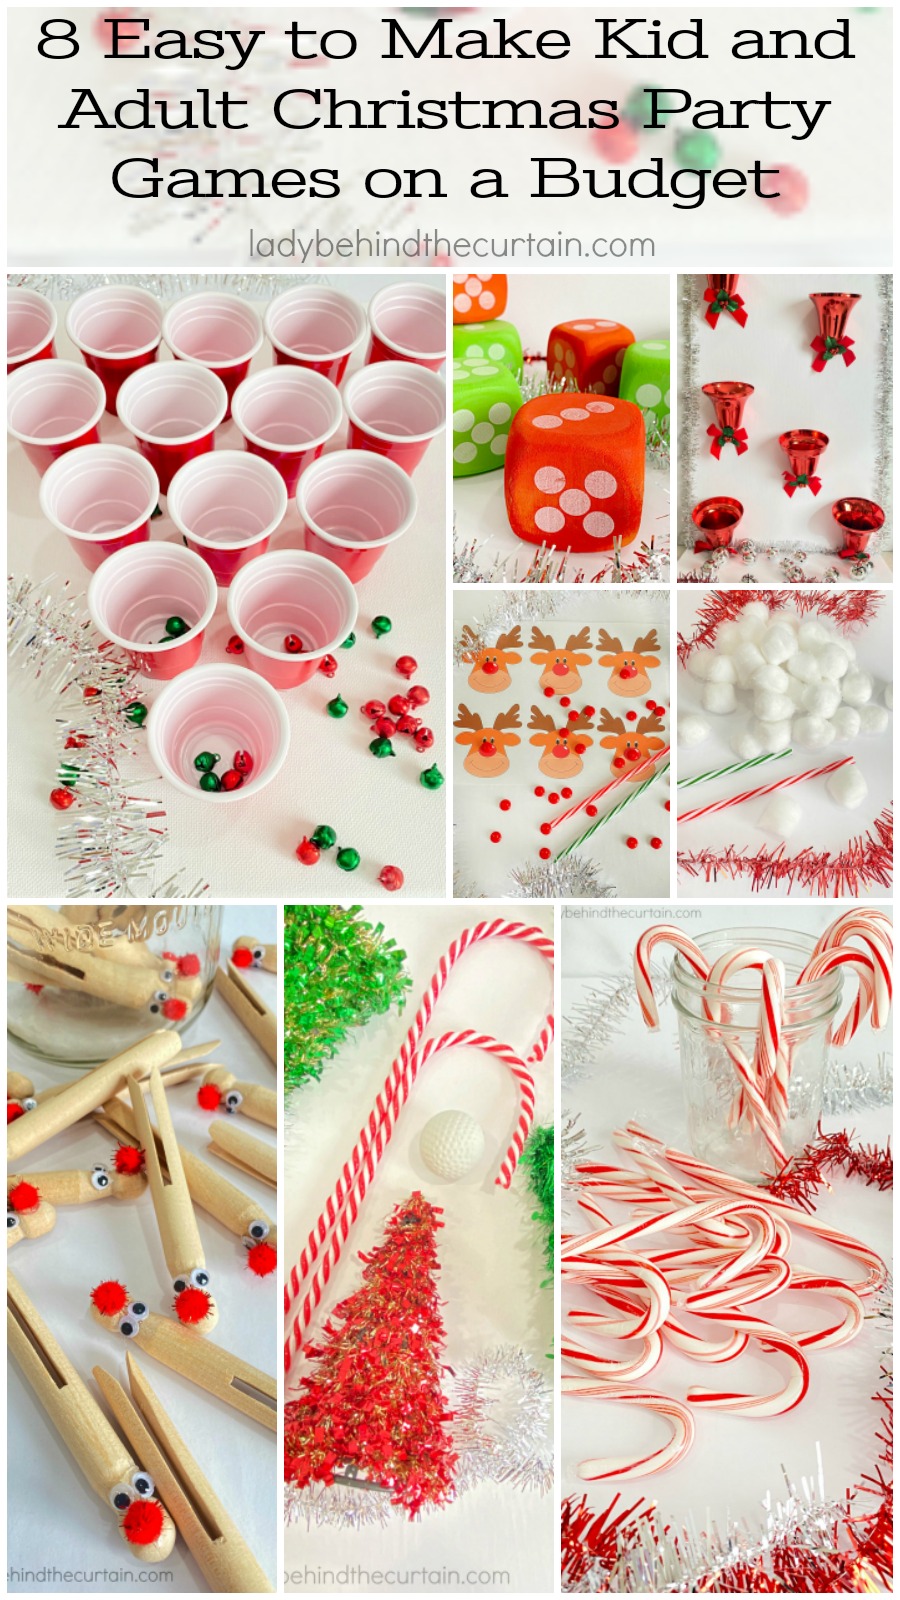 8-easy-to-make-kid-and-adult-christmas-party-games-on-a-budget